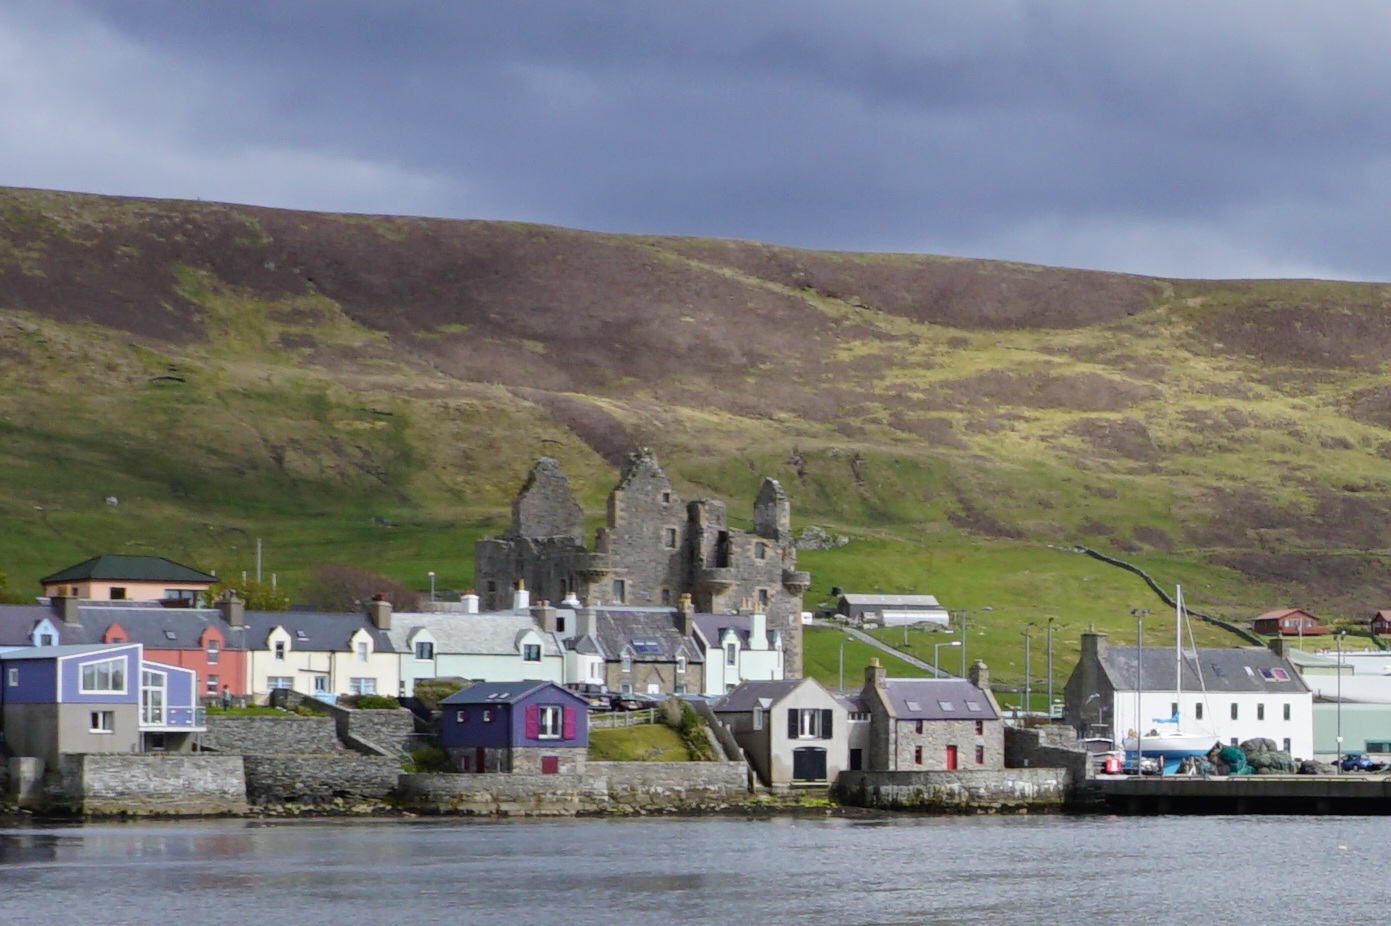 Hither By Thy Help I'm Come: Our trip to Scalloway